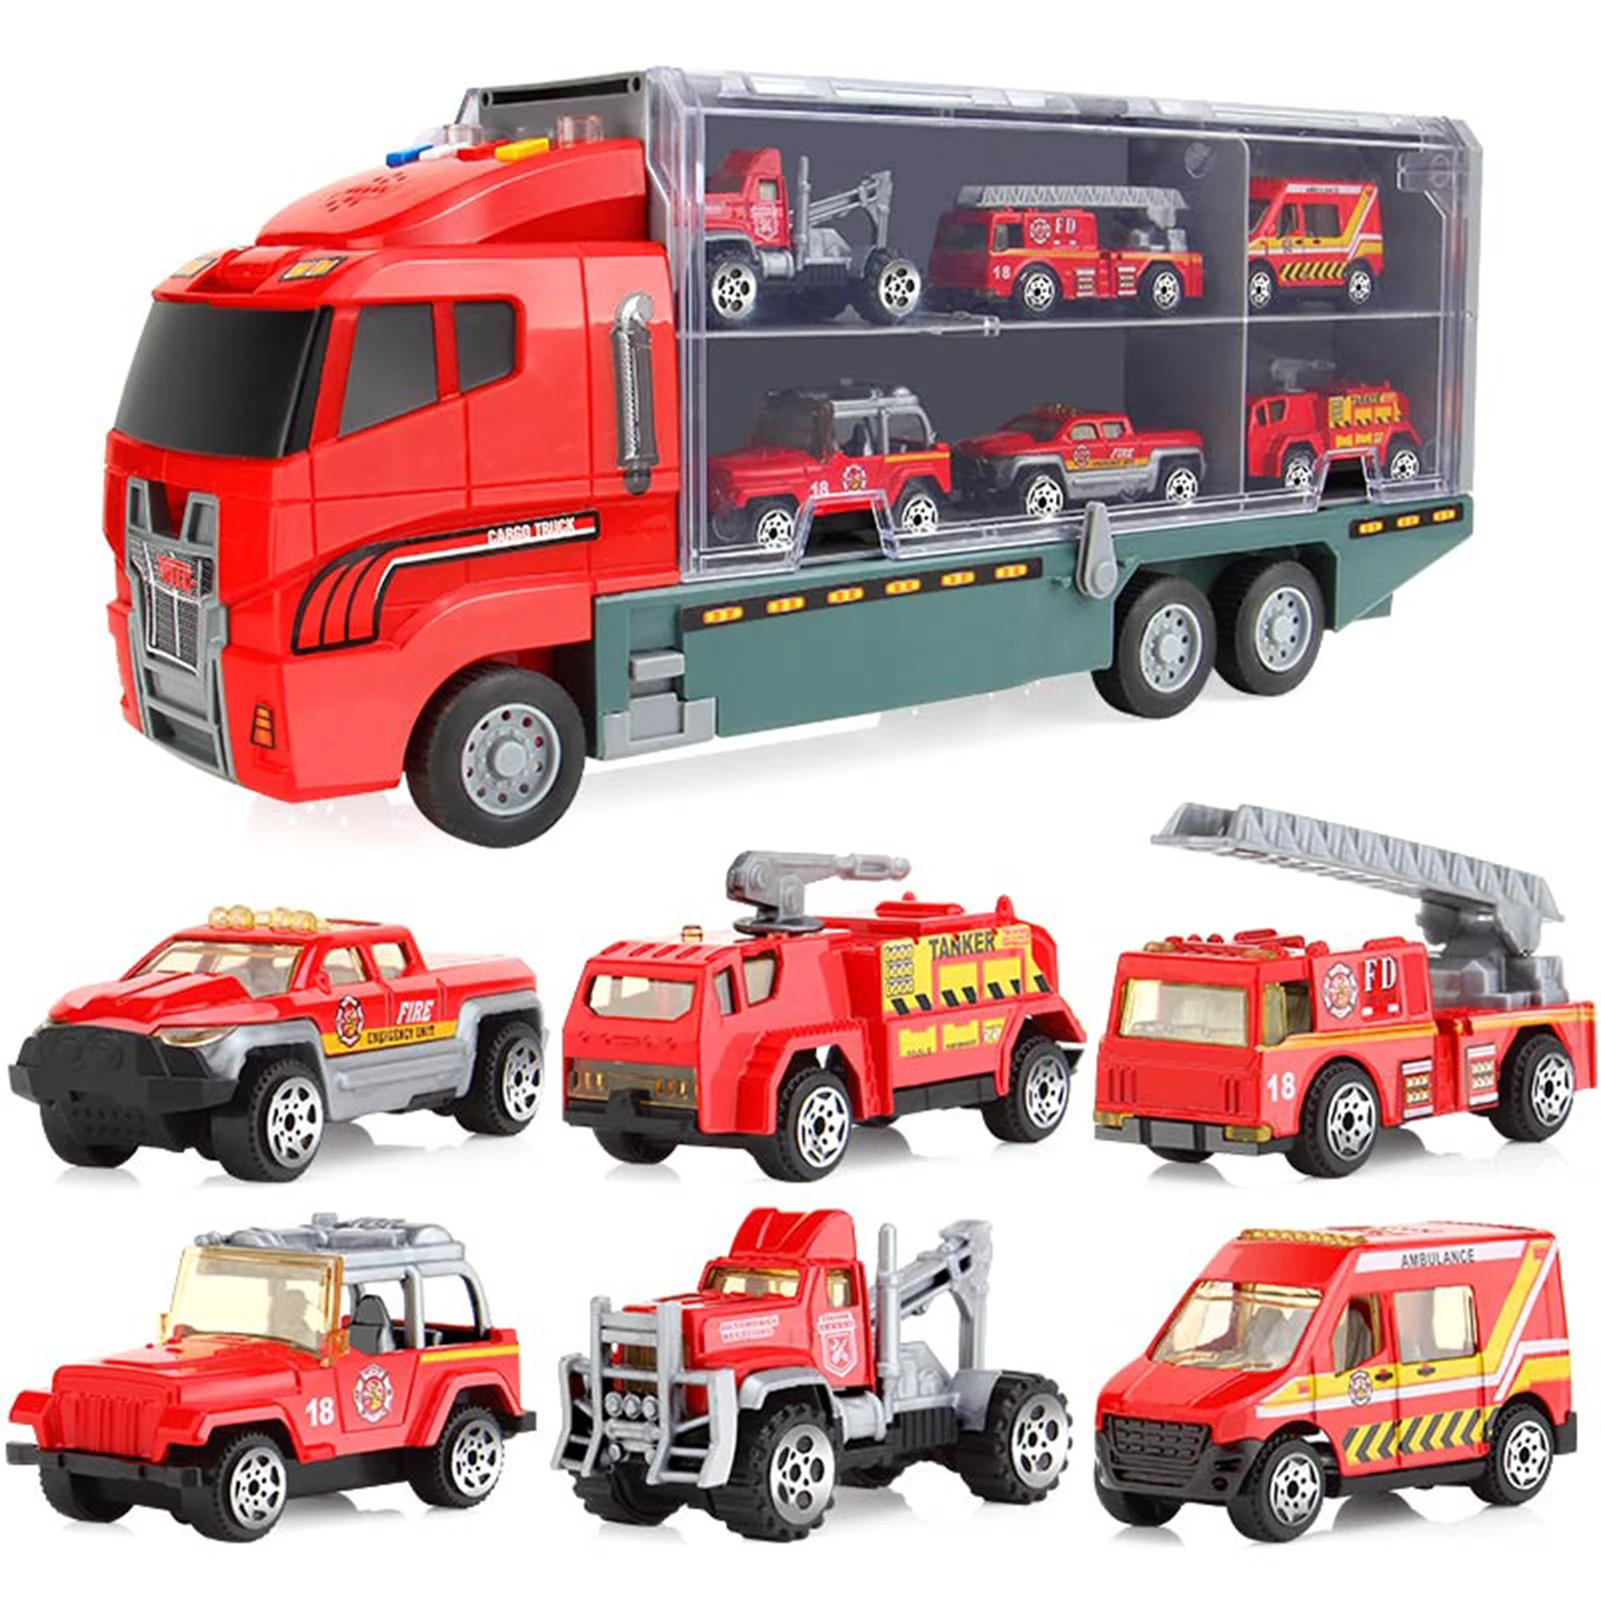 

Engineering Truck Fire Truck Toy Car No Burrs and Durable Cars Toys Suitable for Christmas Birthday Gift